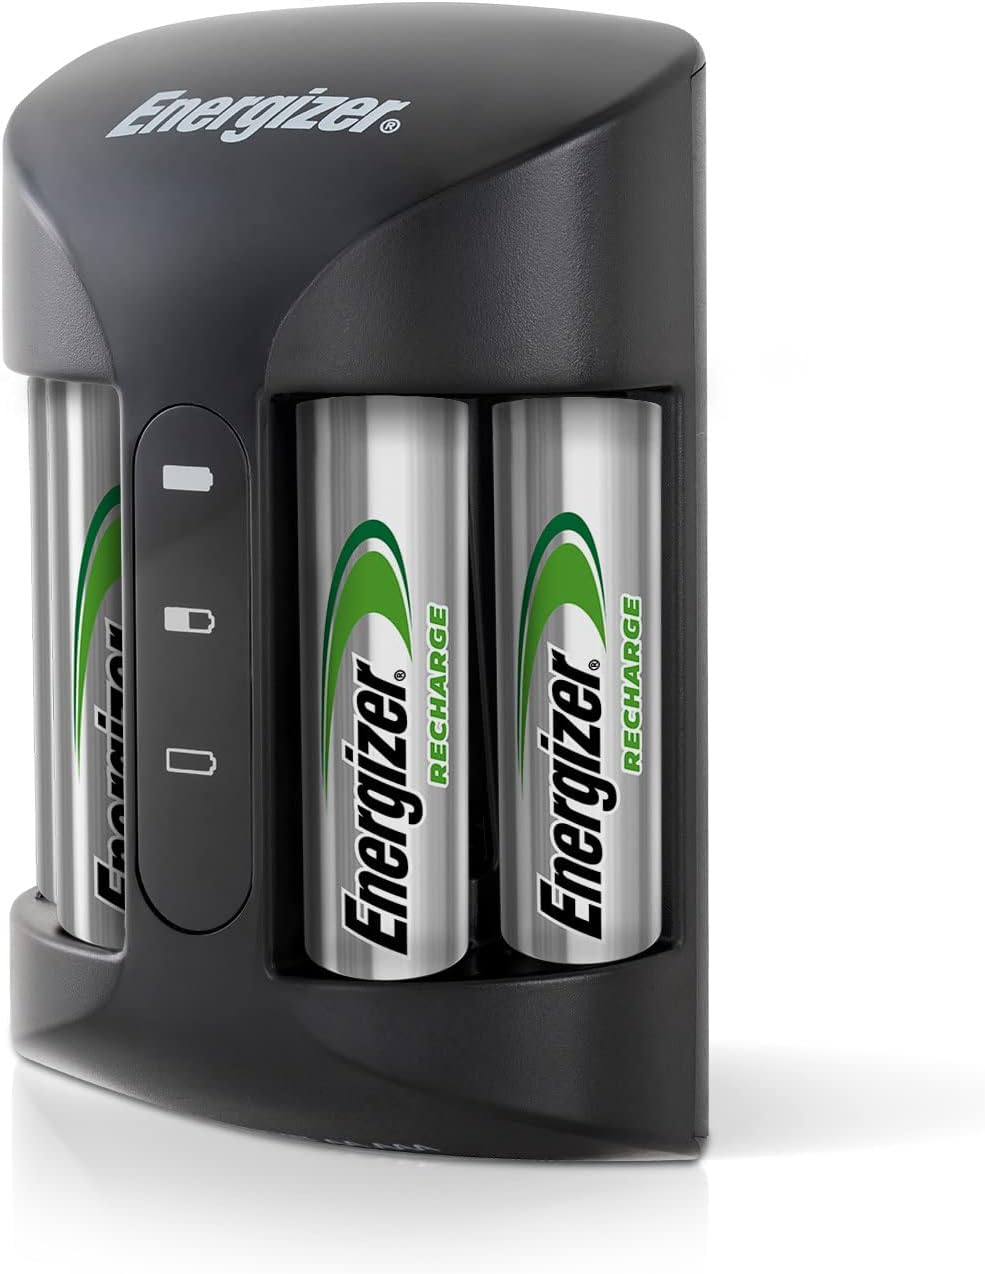 Energizer Rechargeable AA and AAA Battery Charger [...]